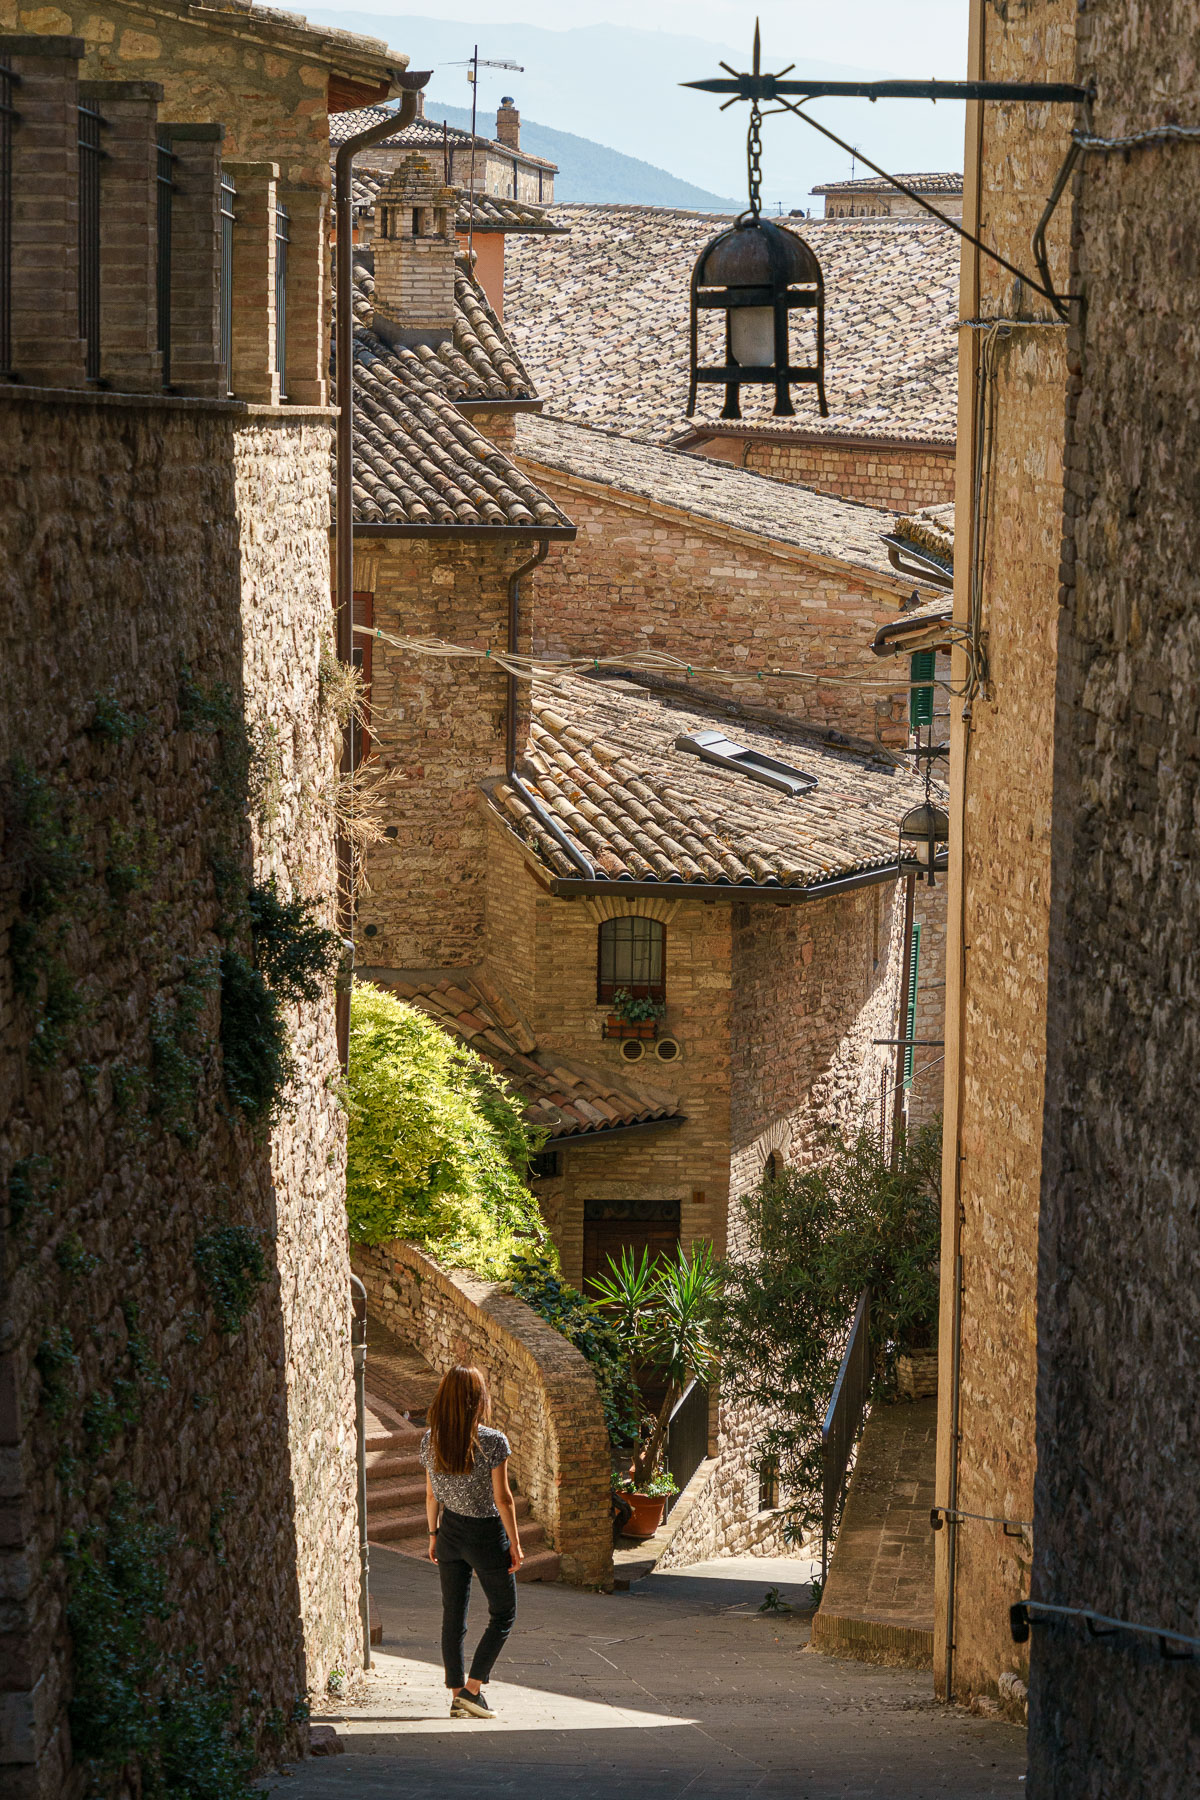 A beautiful street in Assisi, Italy